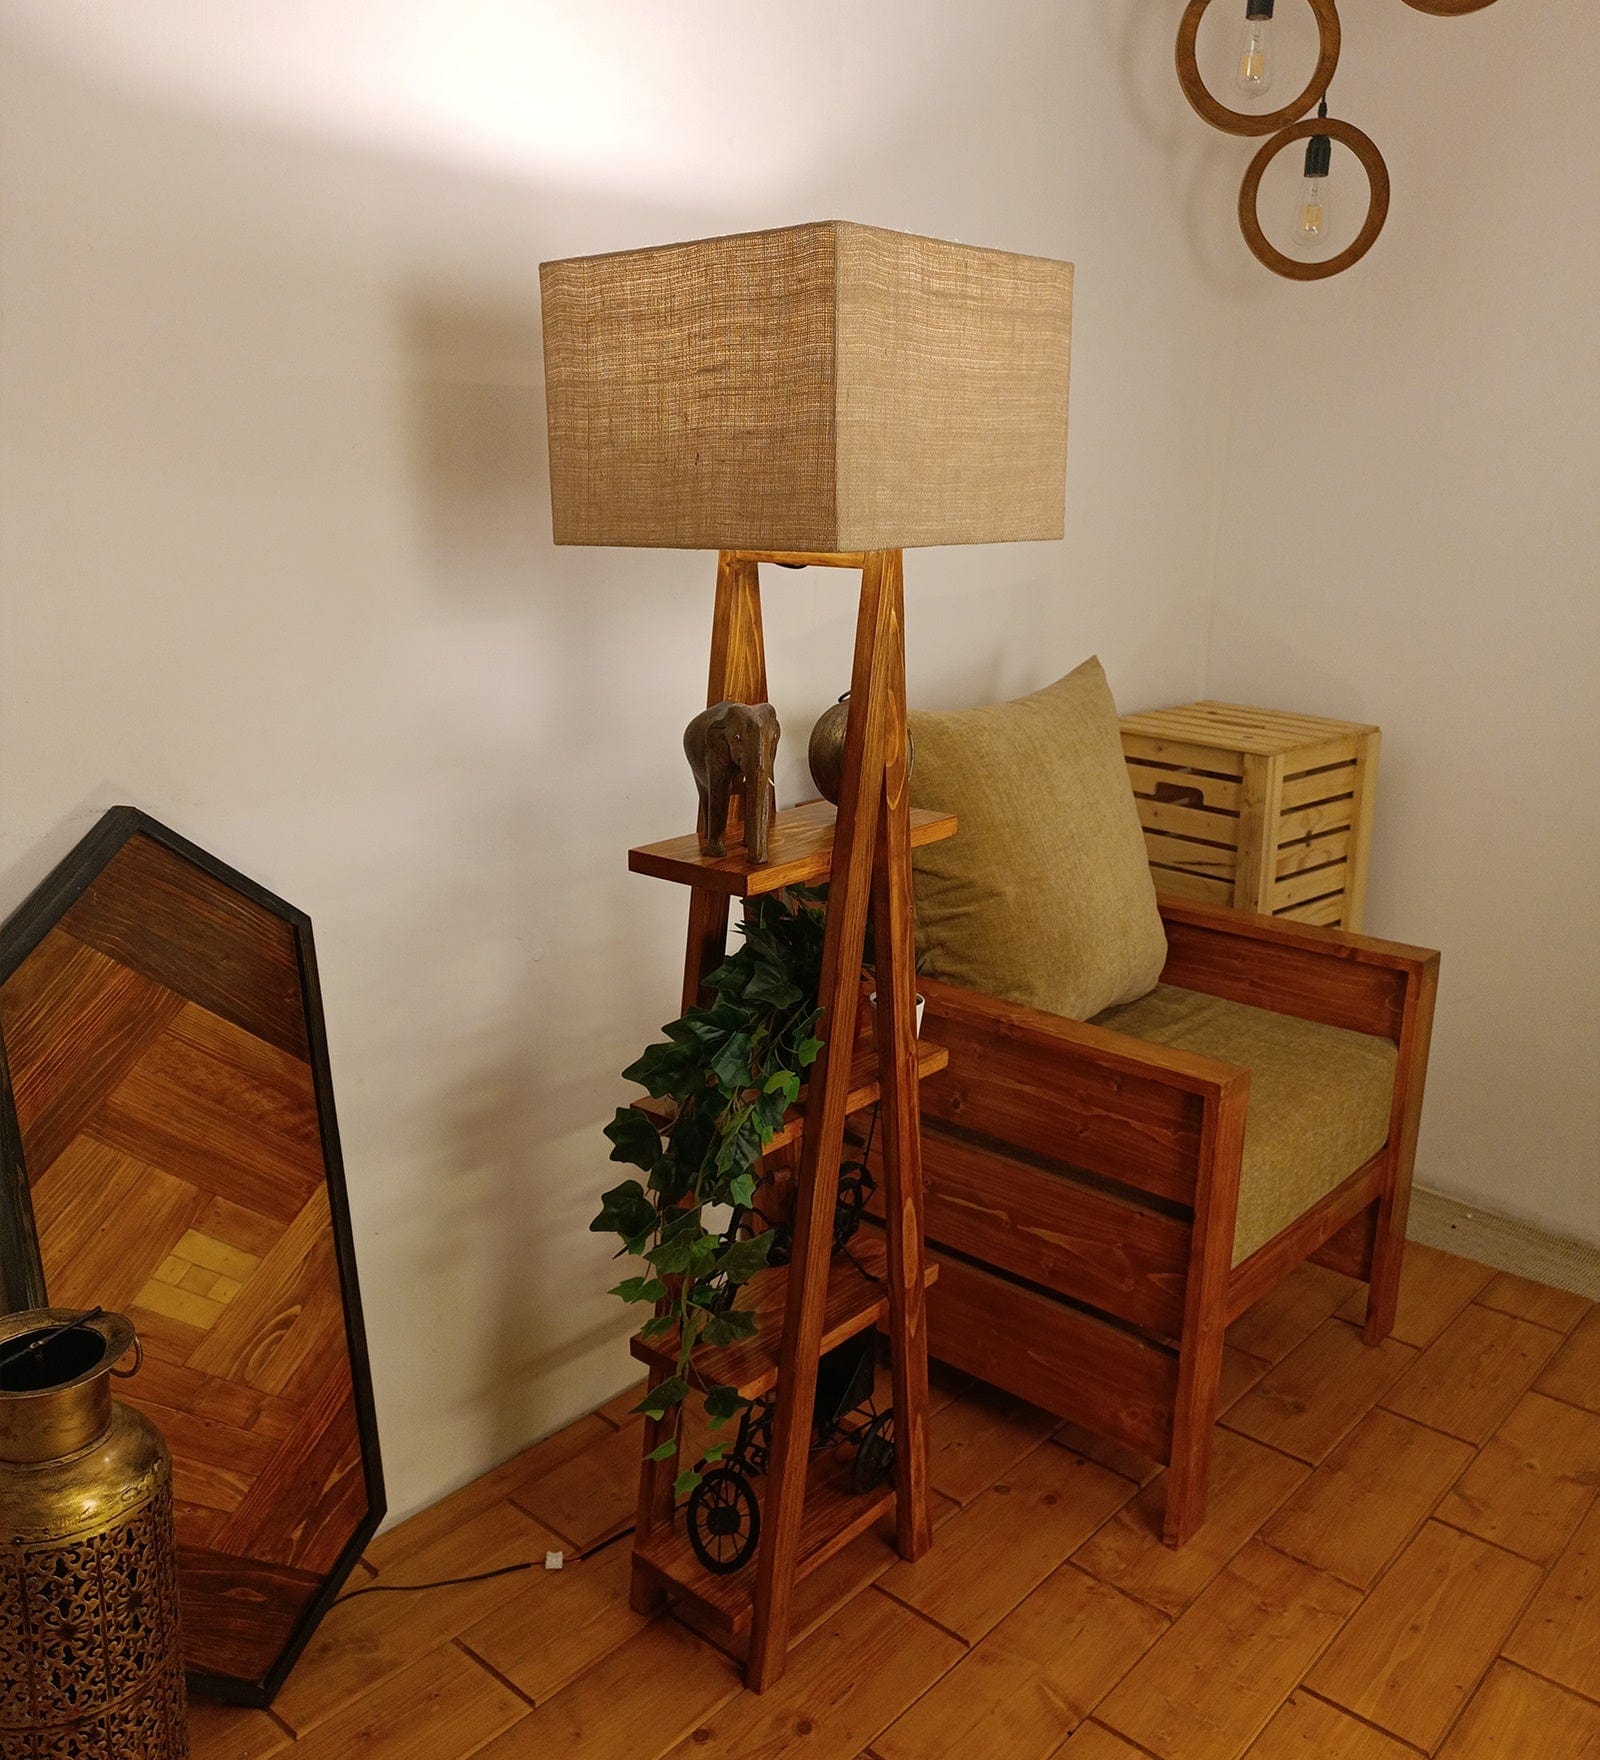 Louise Wooden Floor Lamp with Brown Base and Jute Fabric Lampshade (BULB NOT INCLUDED)